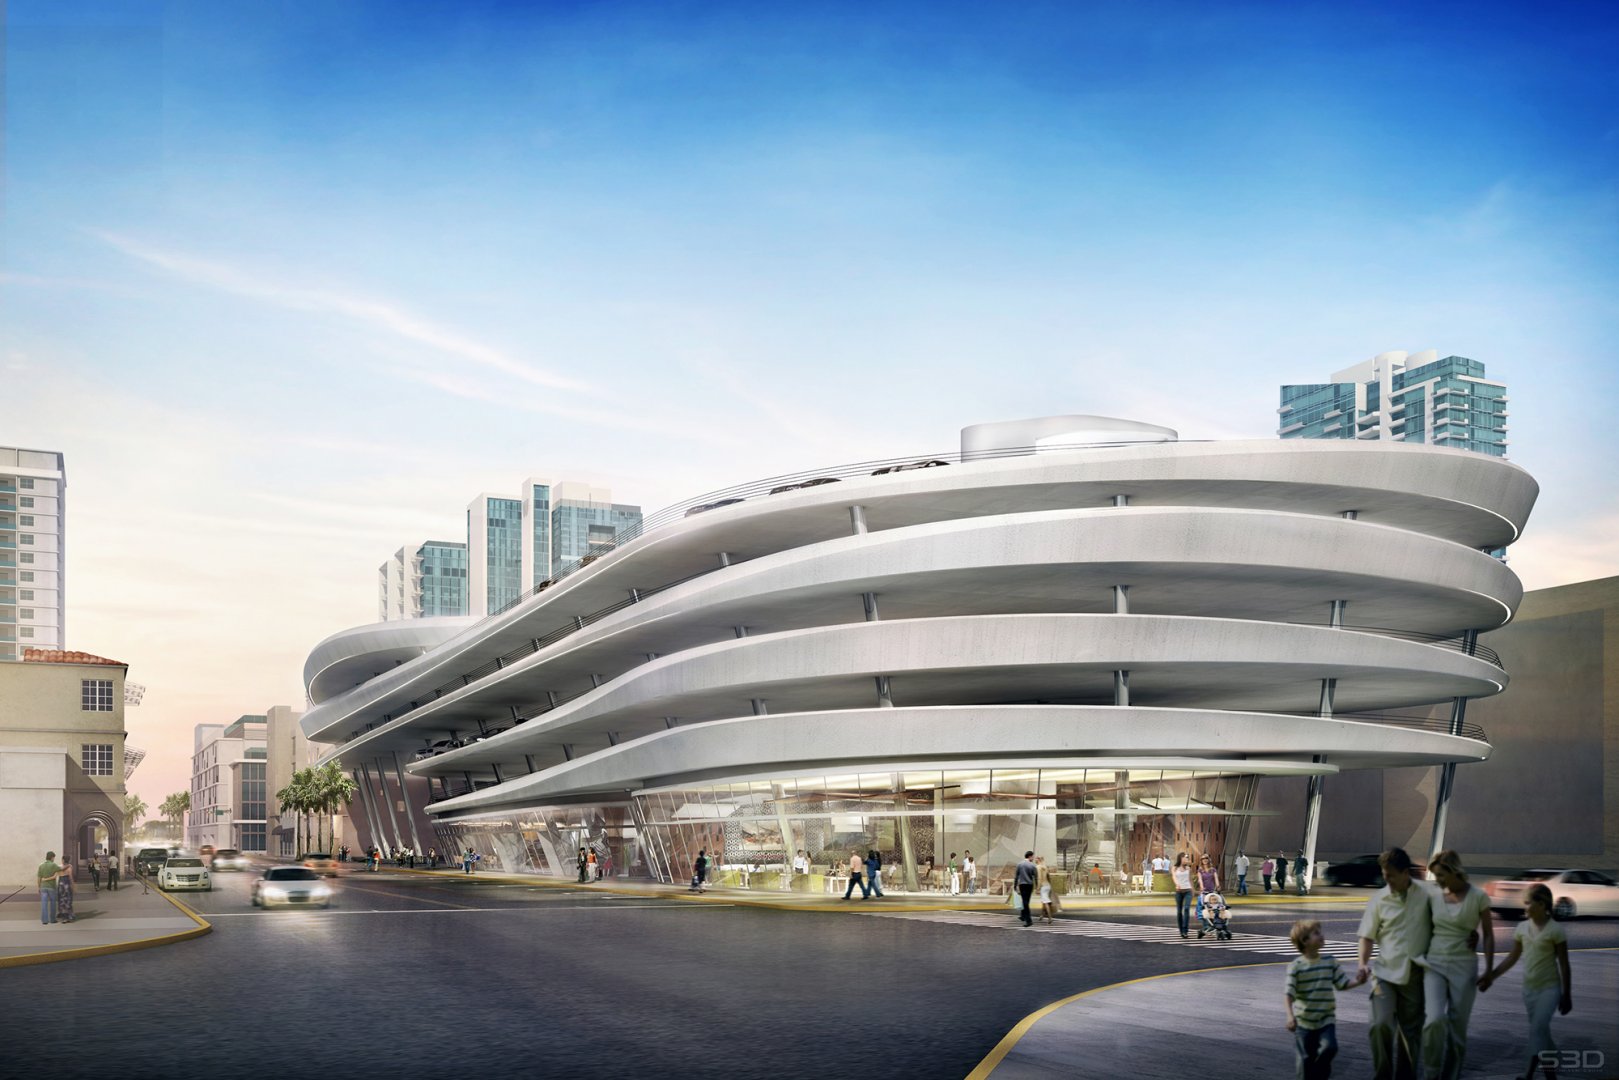 Zaha Hadid's design for Collins Park Place